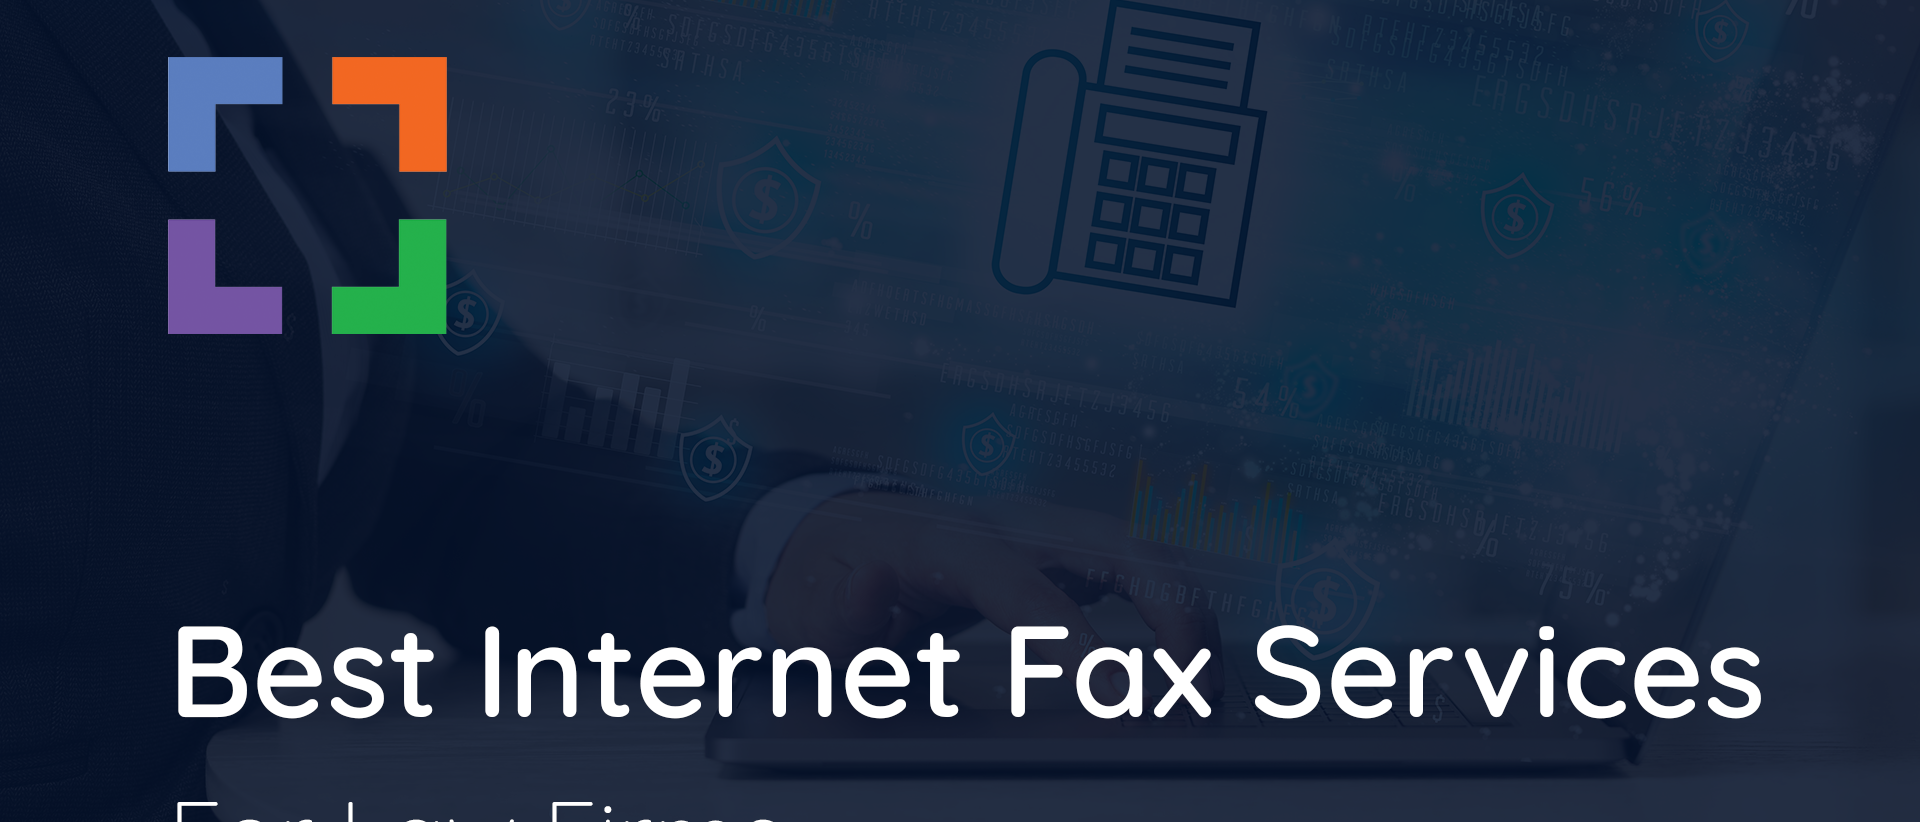 Internet Fax Services for Law Firms